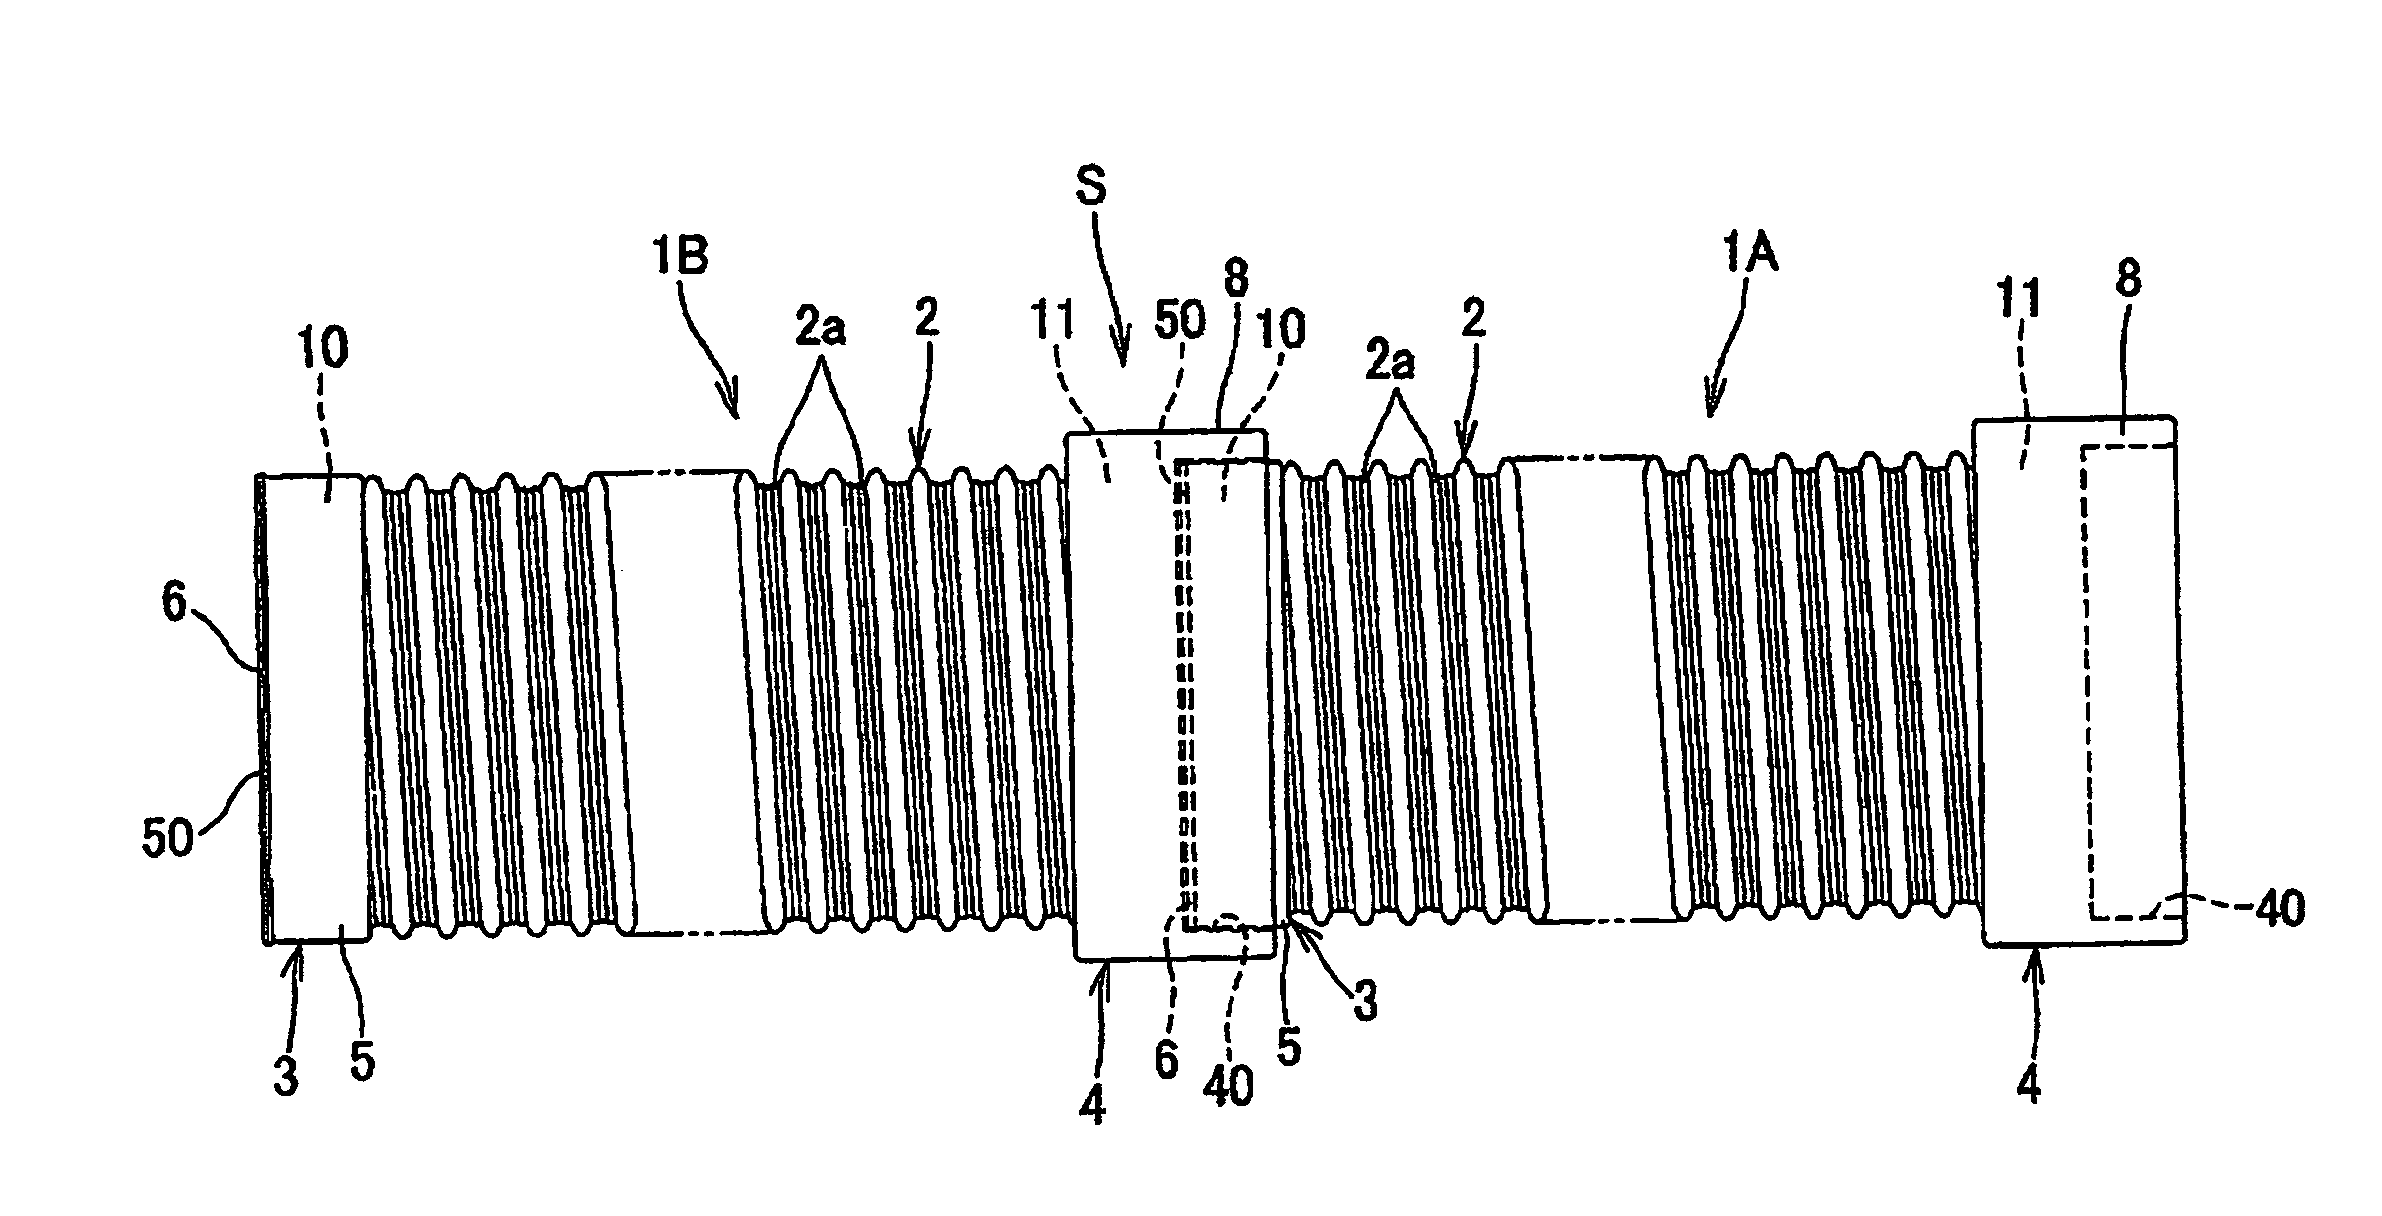 Connection structure of wave-shaped synthetic resin pipes, wave-shaped synthetic resin pipes used for the connection structure, and manufacturing method thereof